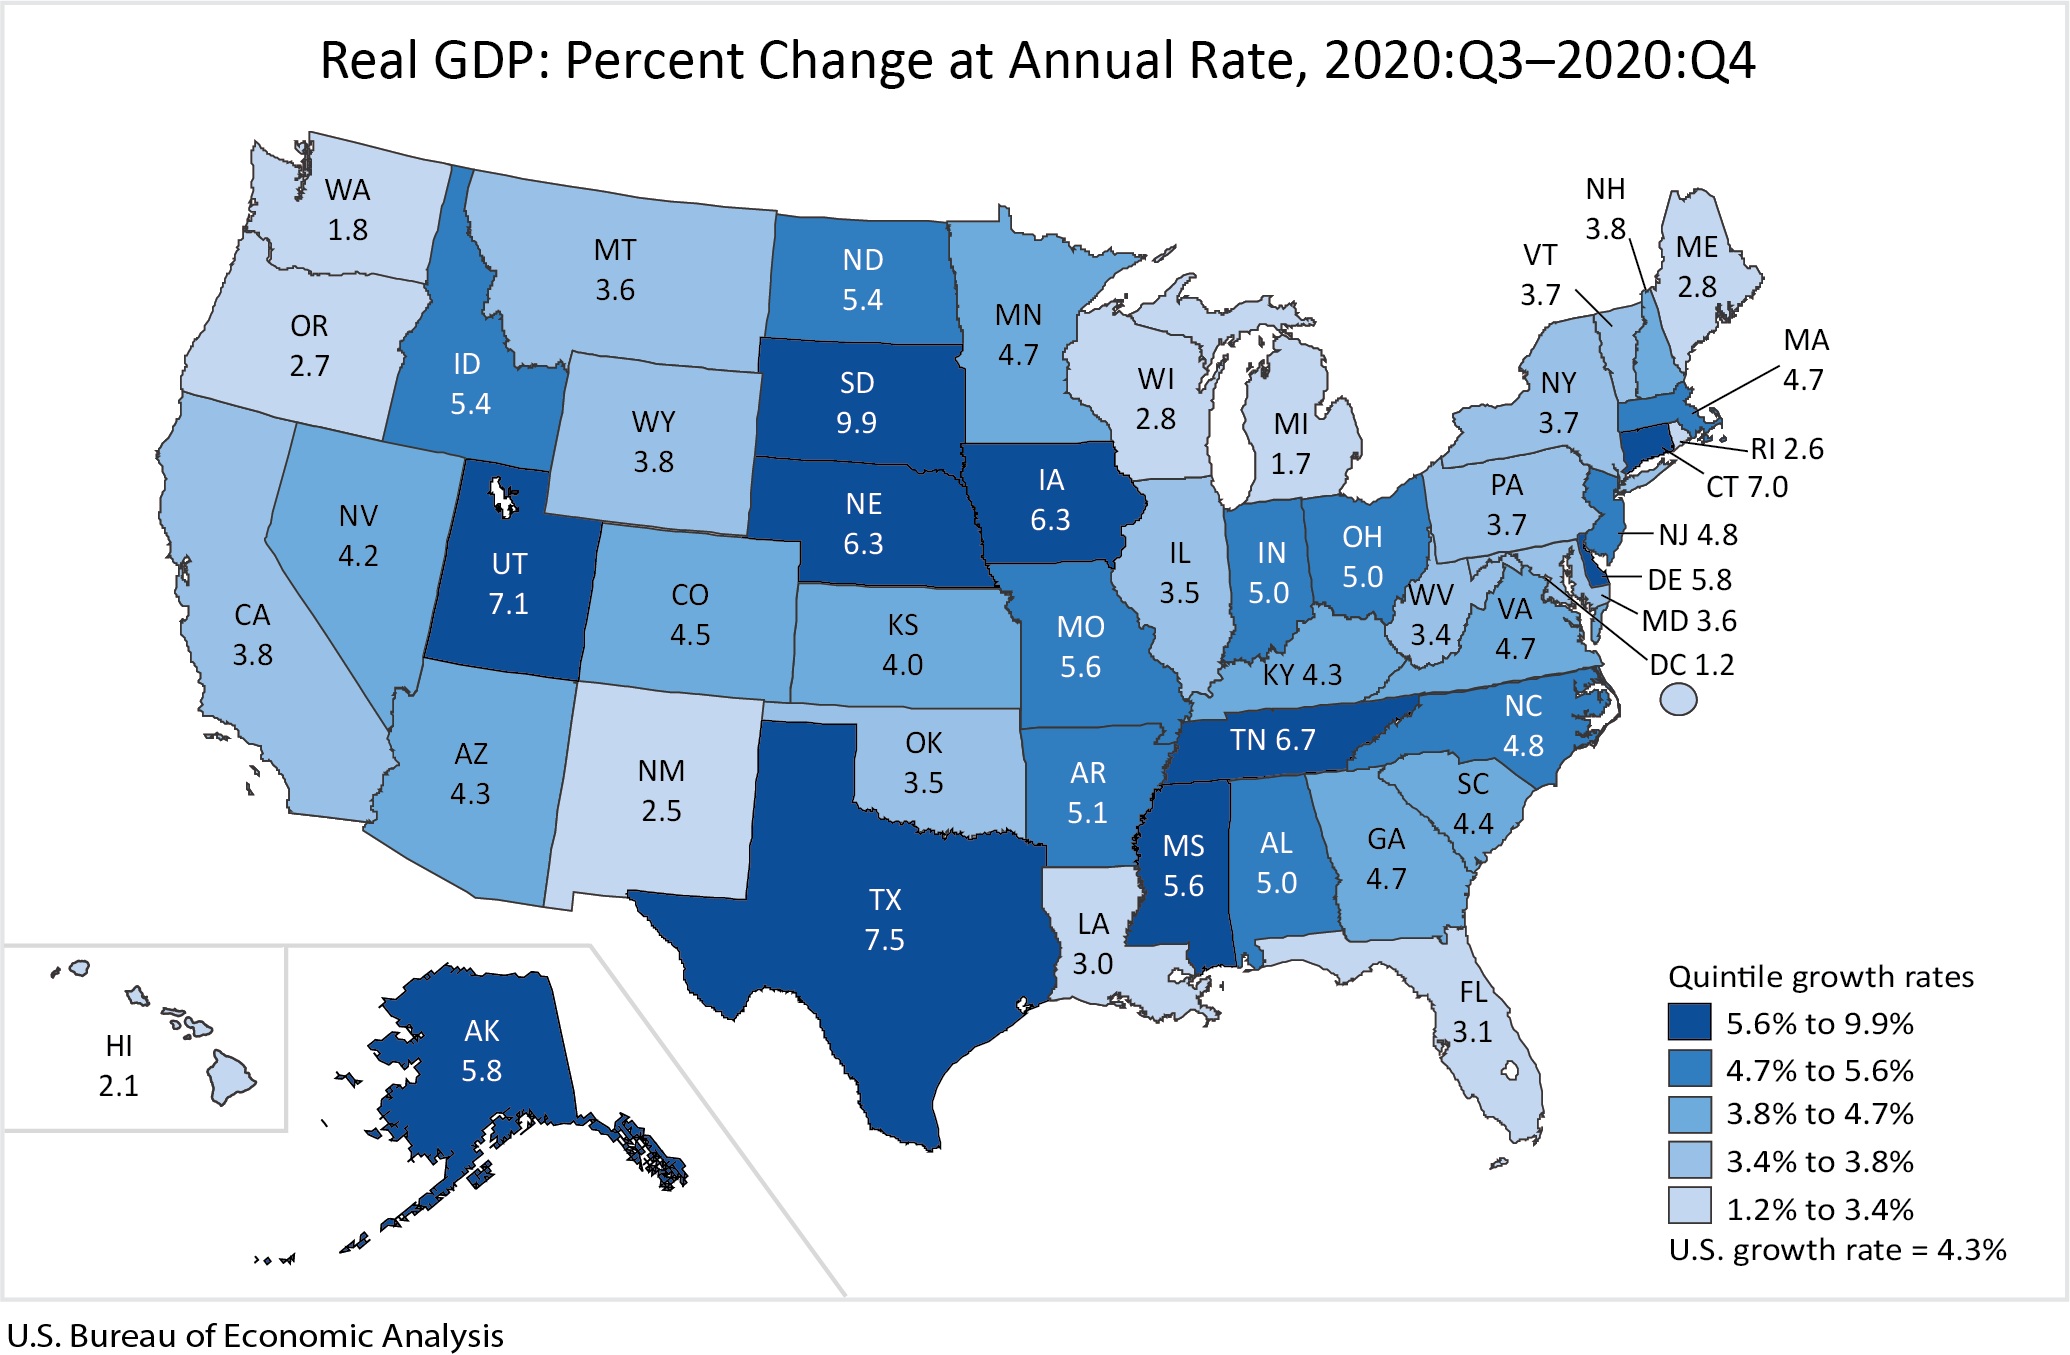 Real GDP: Percent Change at Annual Rate, 2020:Q3-2020:Q4